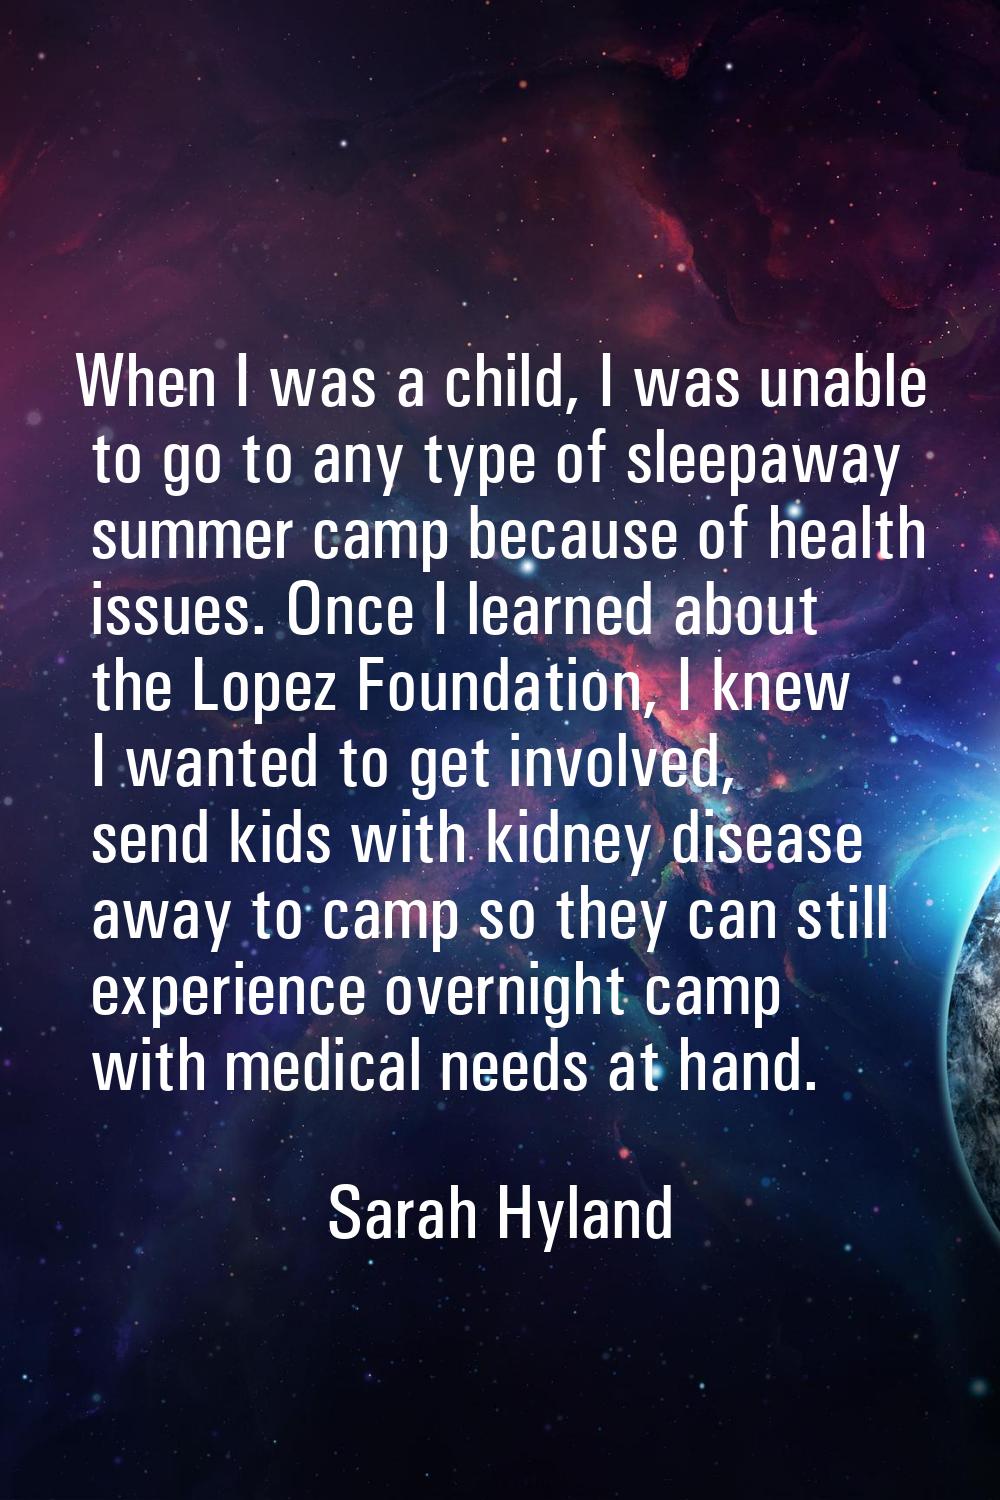 When I was a child, I was unable to go to any type of sleepaway summer camp because of health issue